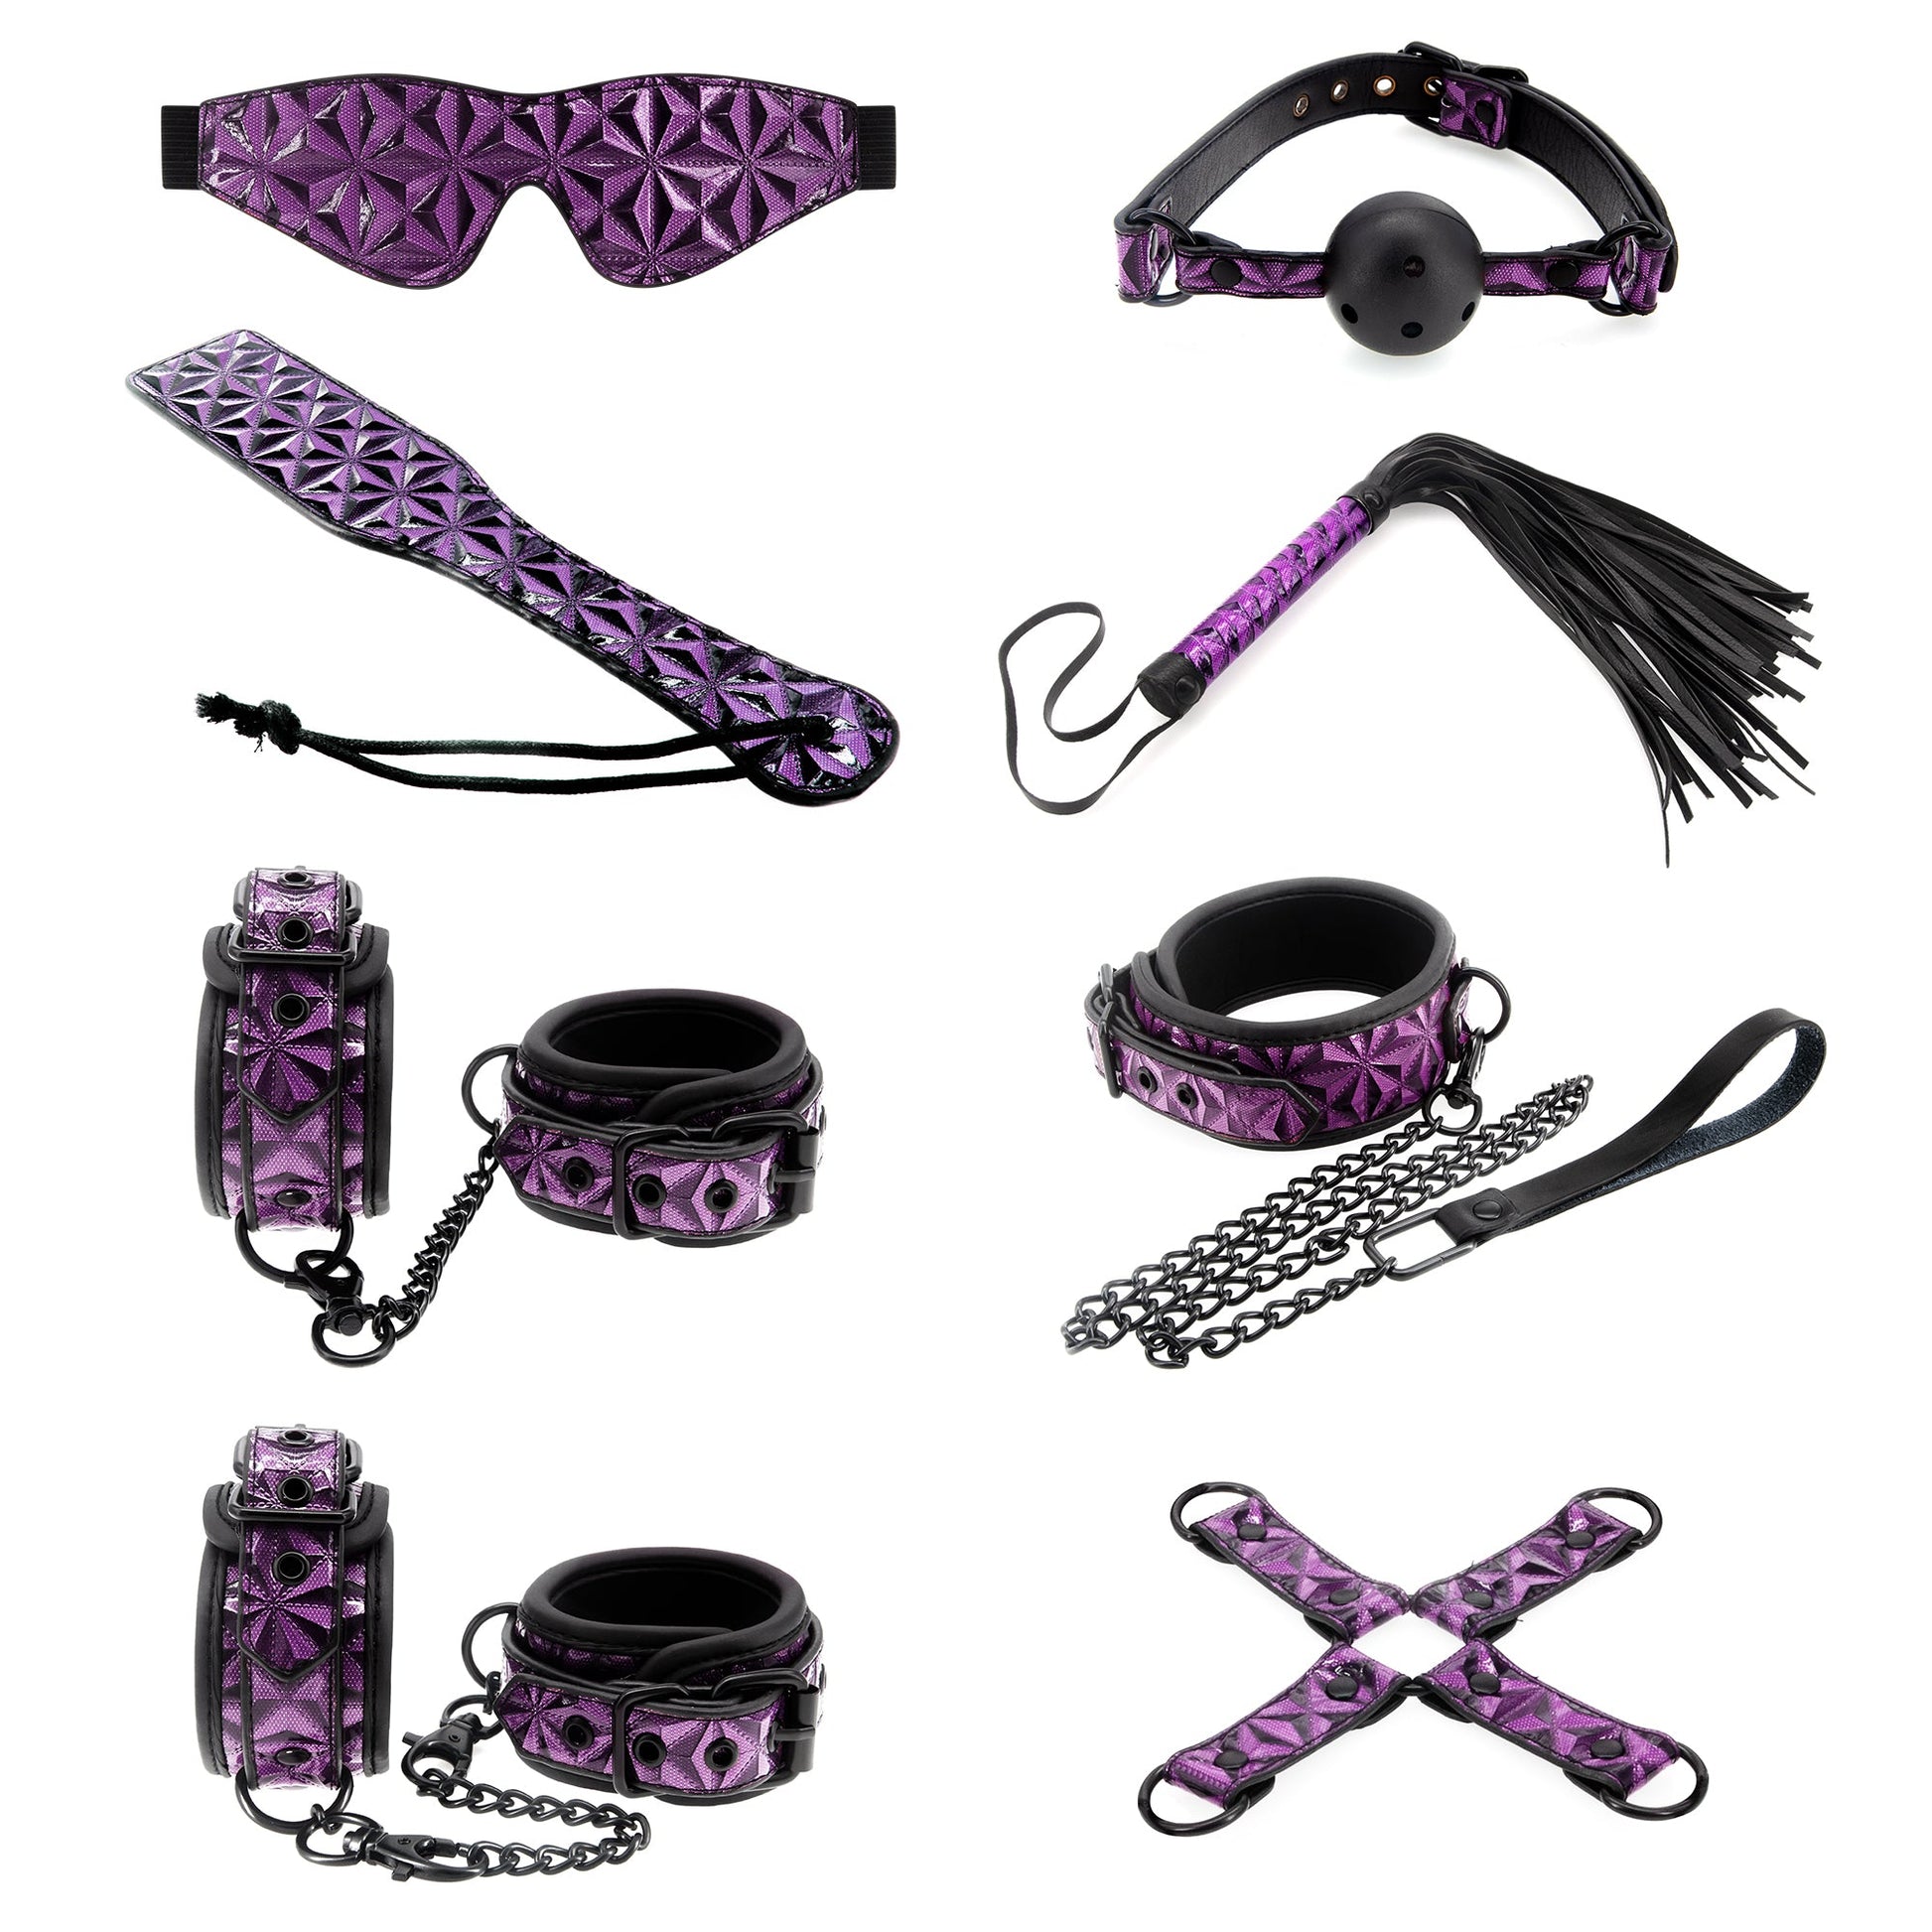 Adult unisex SM set PU collar for sexual wear, training, binding, and fun toys - Sexy-Fantasy